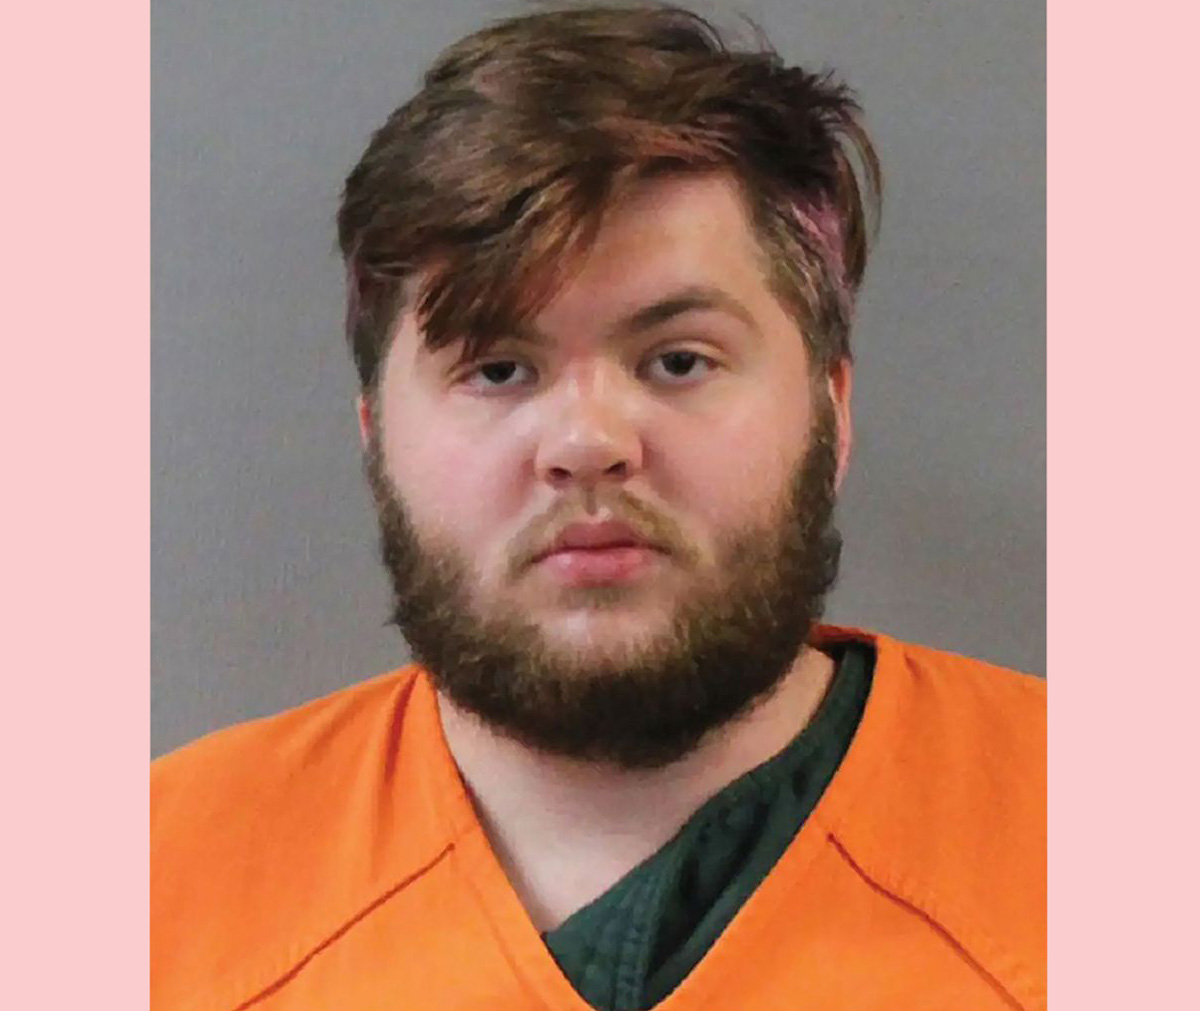 #Teen Dad Arrested After Allegedly Leaving 1-Year-Old Son In Hot Car To Die In ‘Deliberate Act’